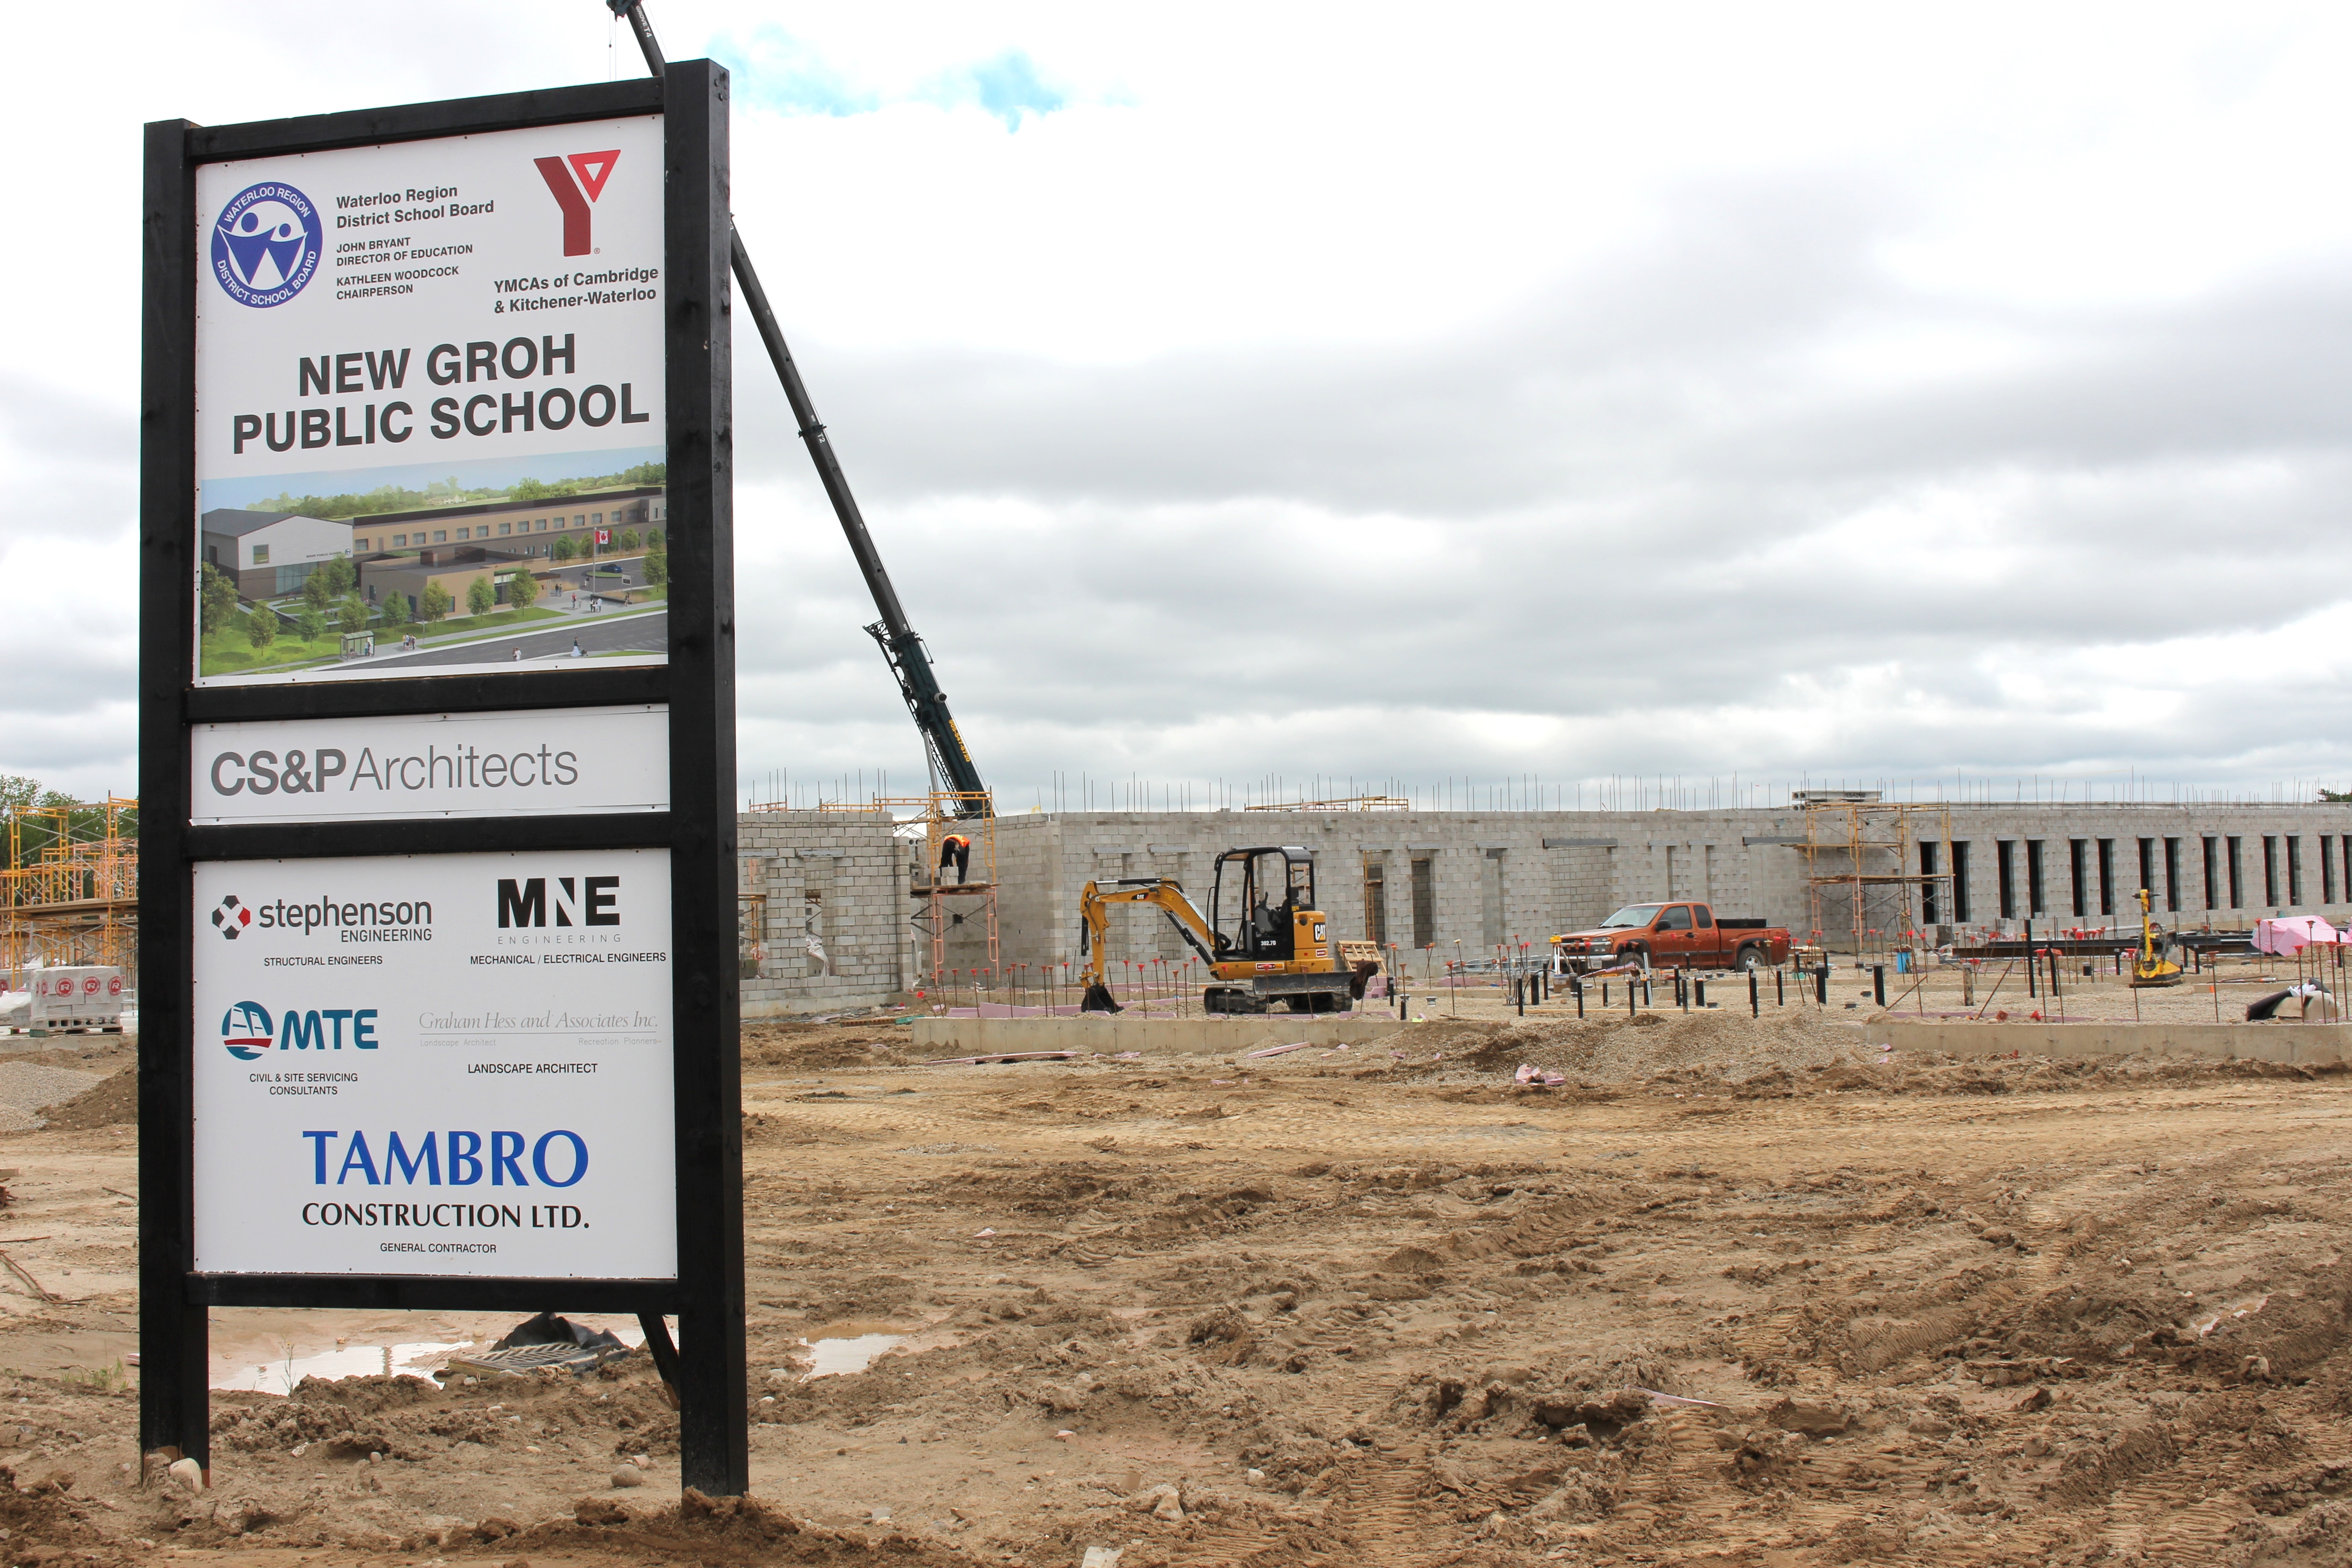 The site of our new south Kitchener elementary school, Groh PS.